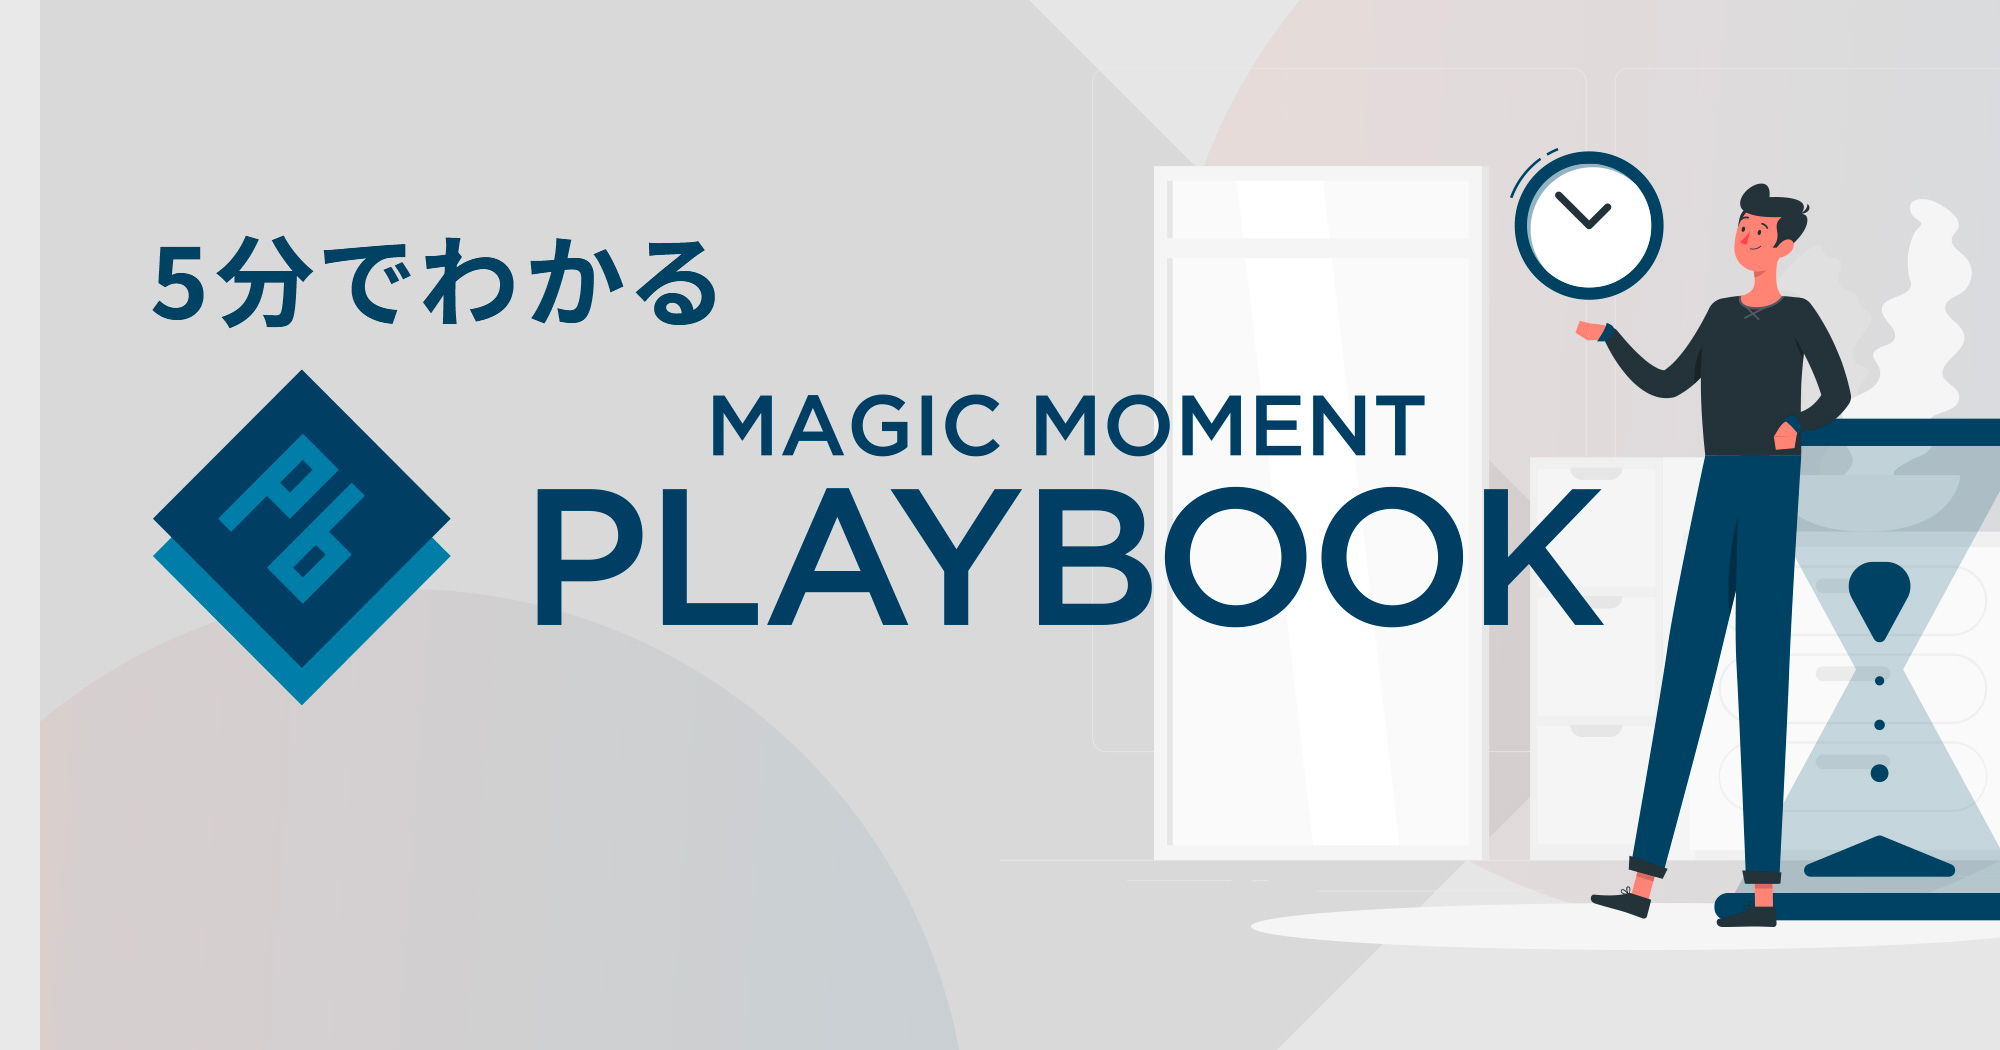 What is Magic Moment Playbook